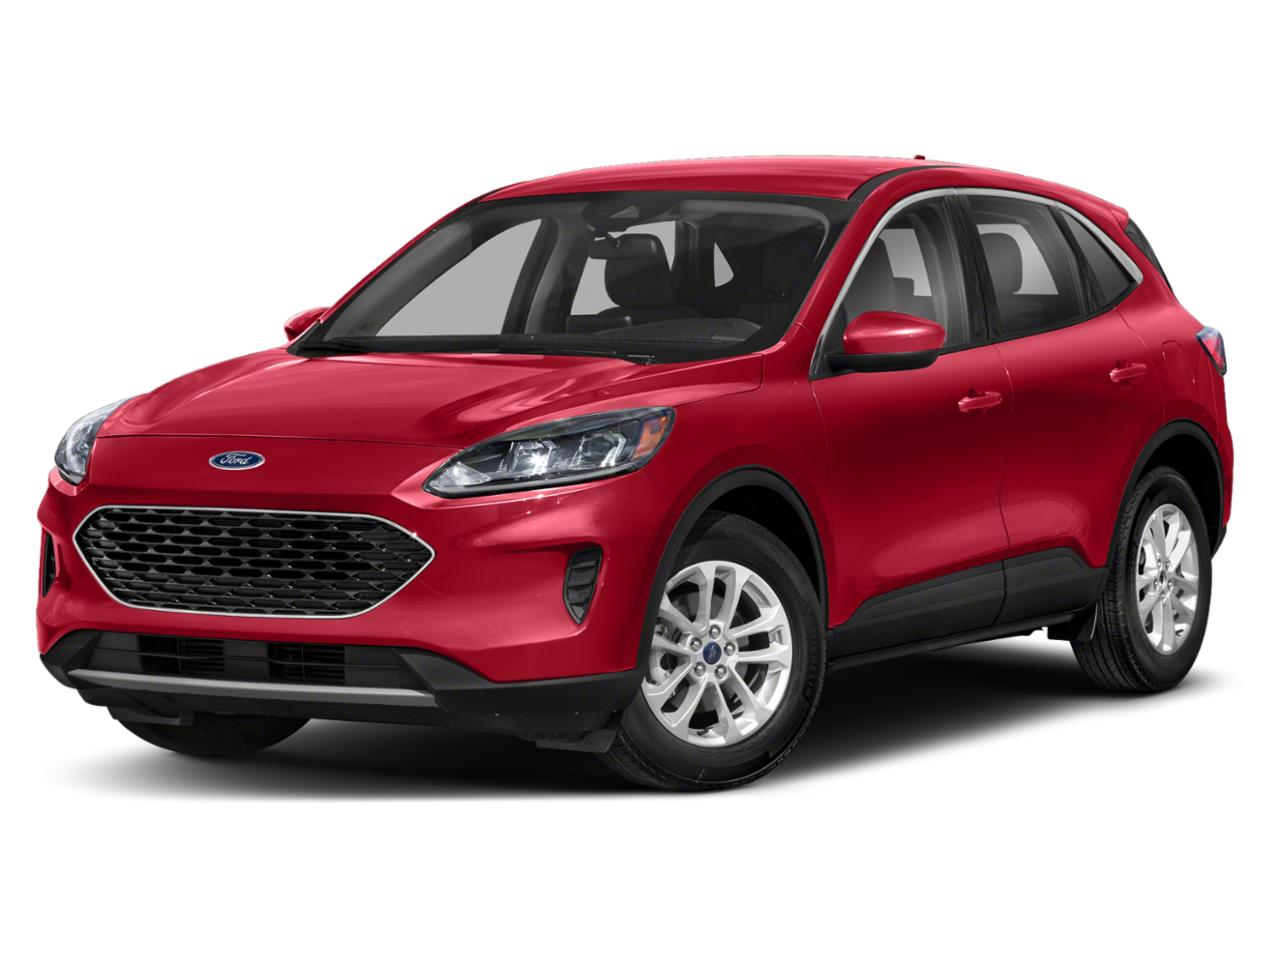 2020 Ford Escape Vehicle Photo in Plainfield, IL 60586